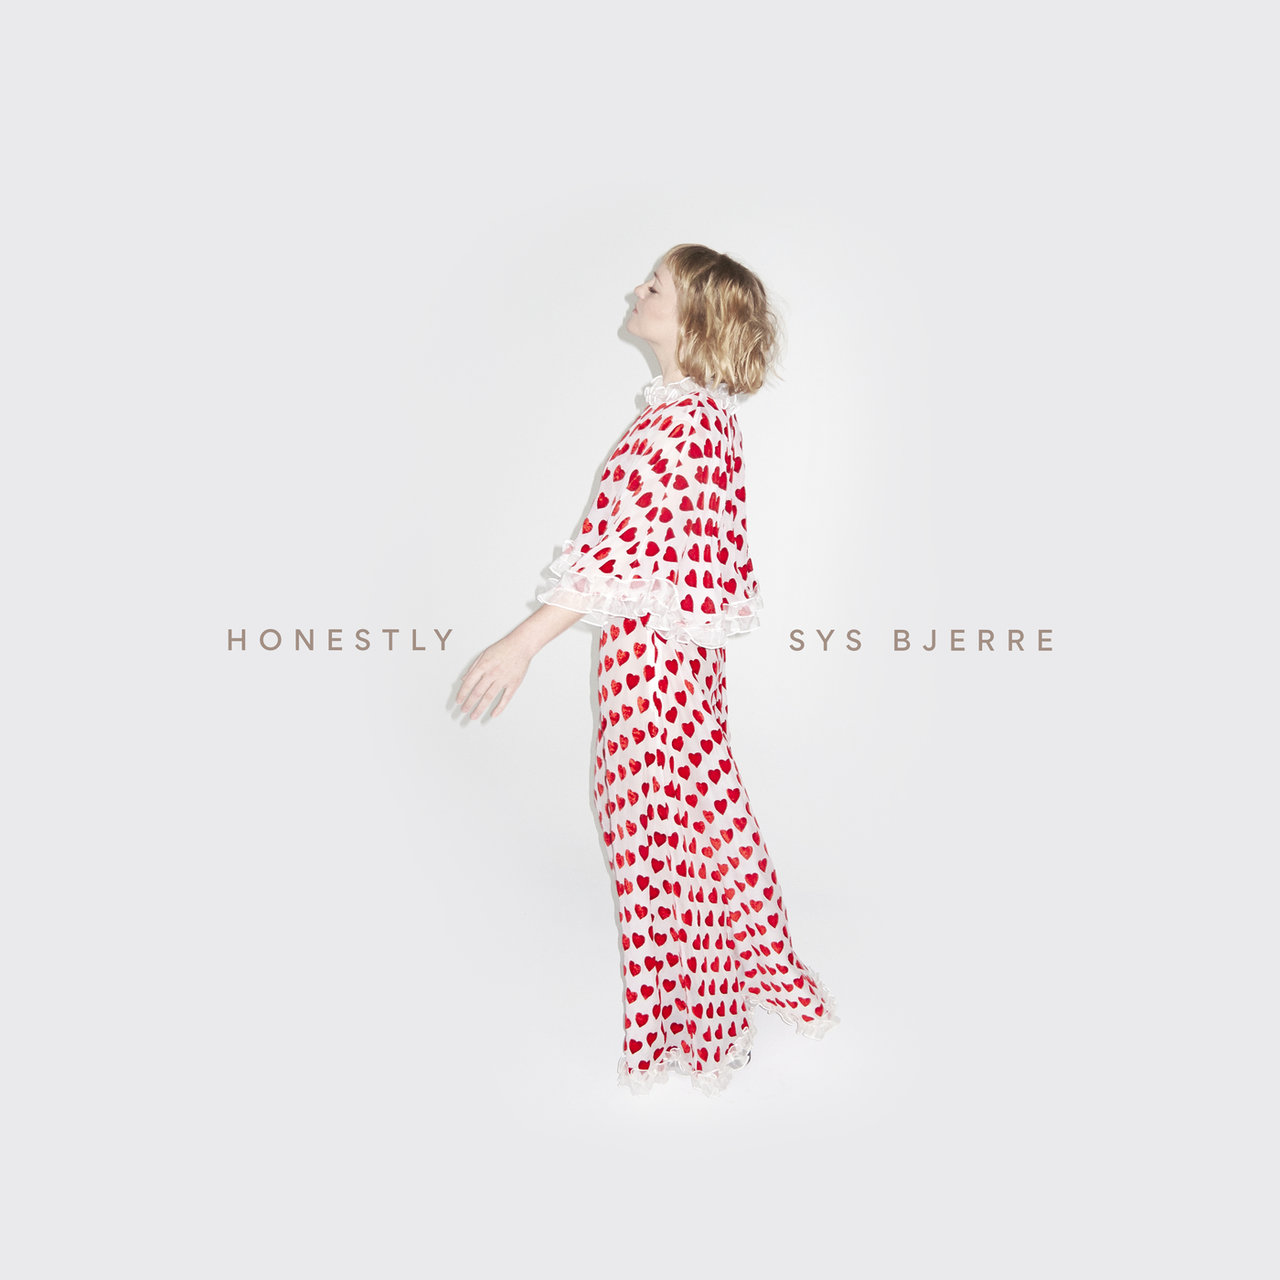 Sys Bjerre — Honestly cover artwork